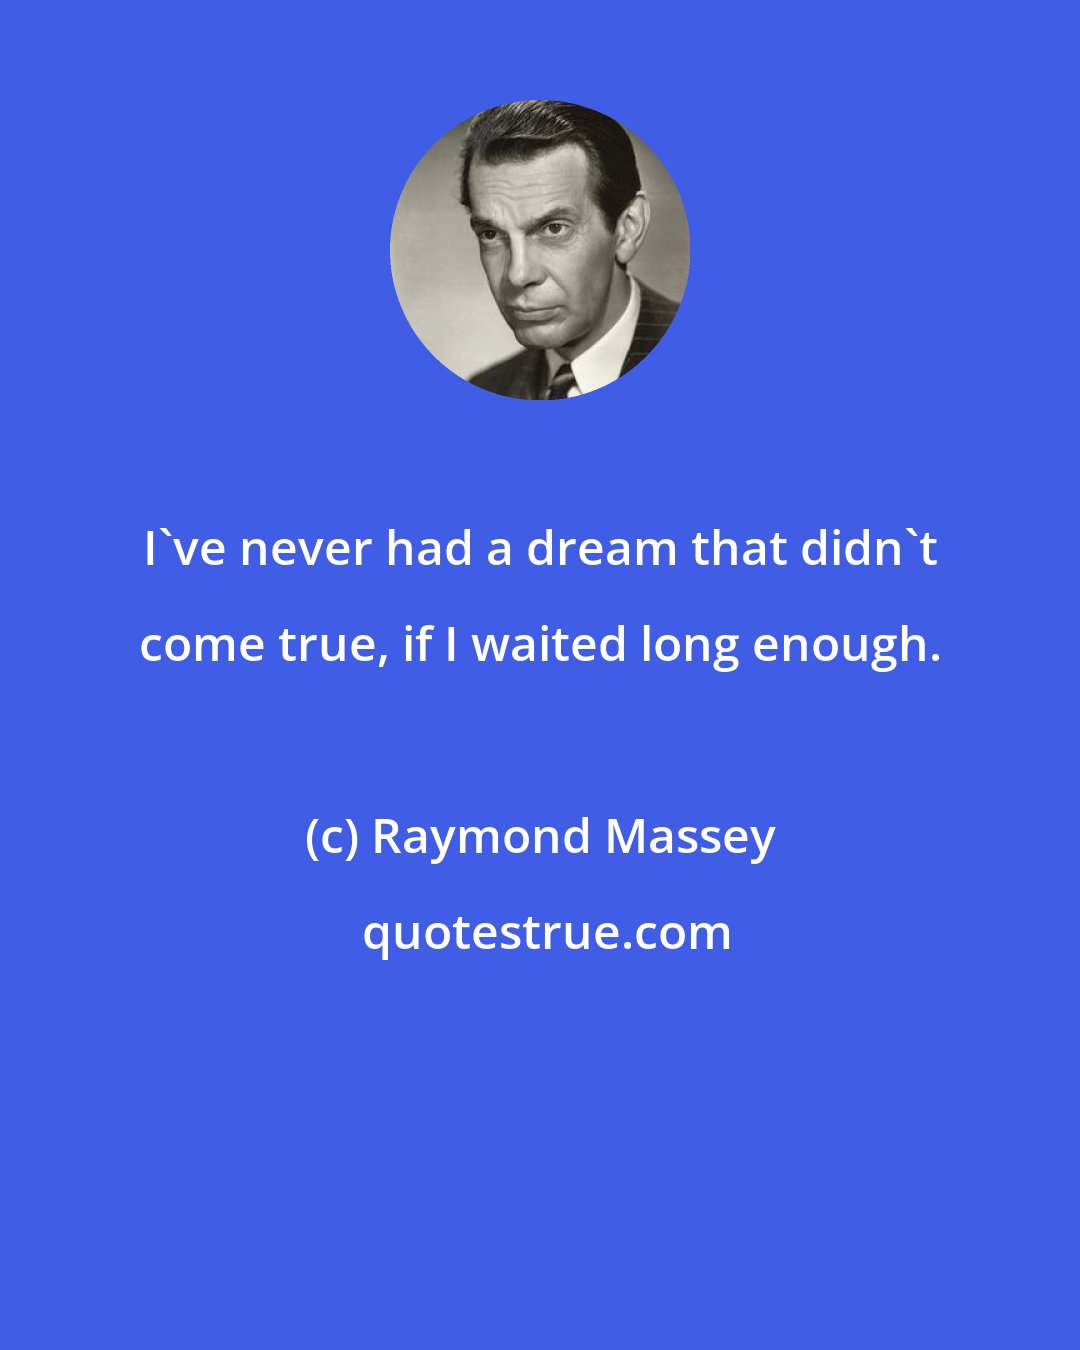 Raymond Massey: I've never had a dream that didn't come true, if I waited long enough.